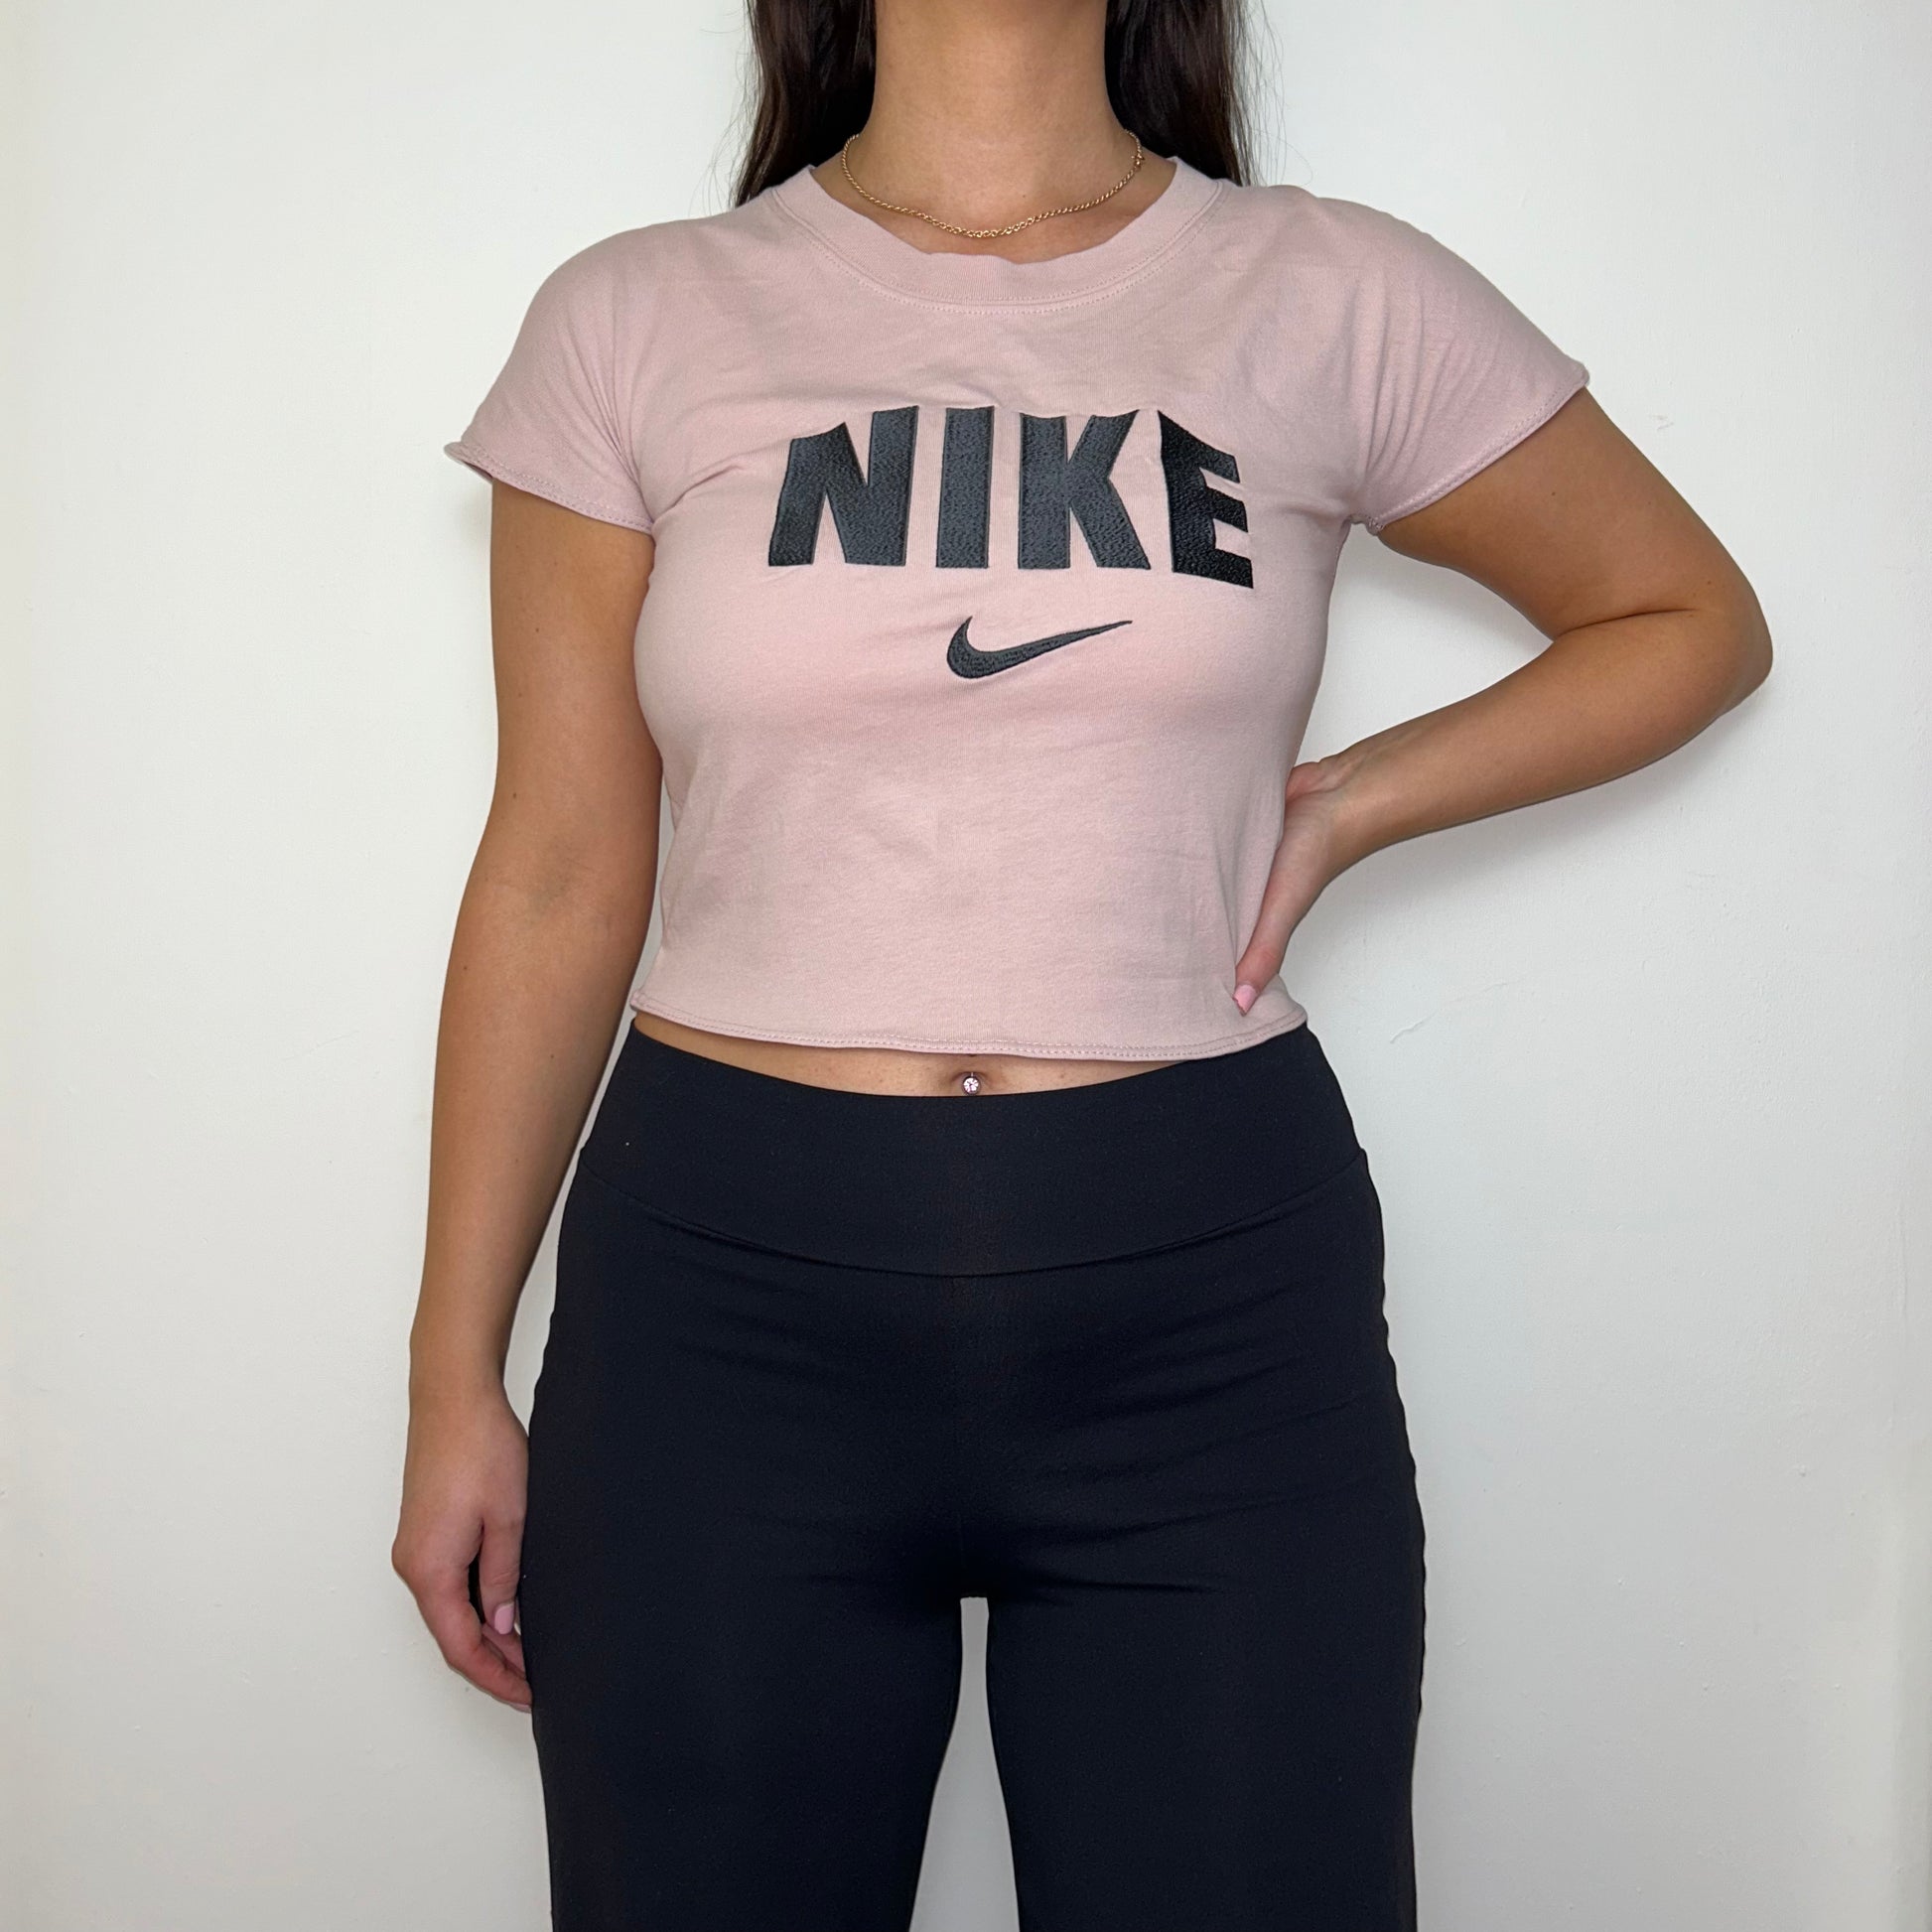 light pink short sleeve crop top with black nike logo shown on a model wearing black trousers